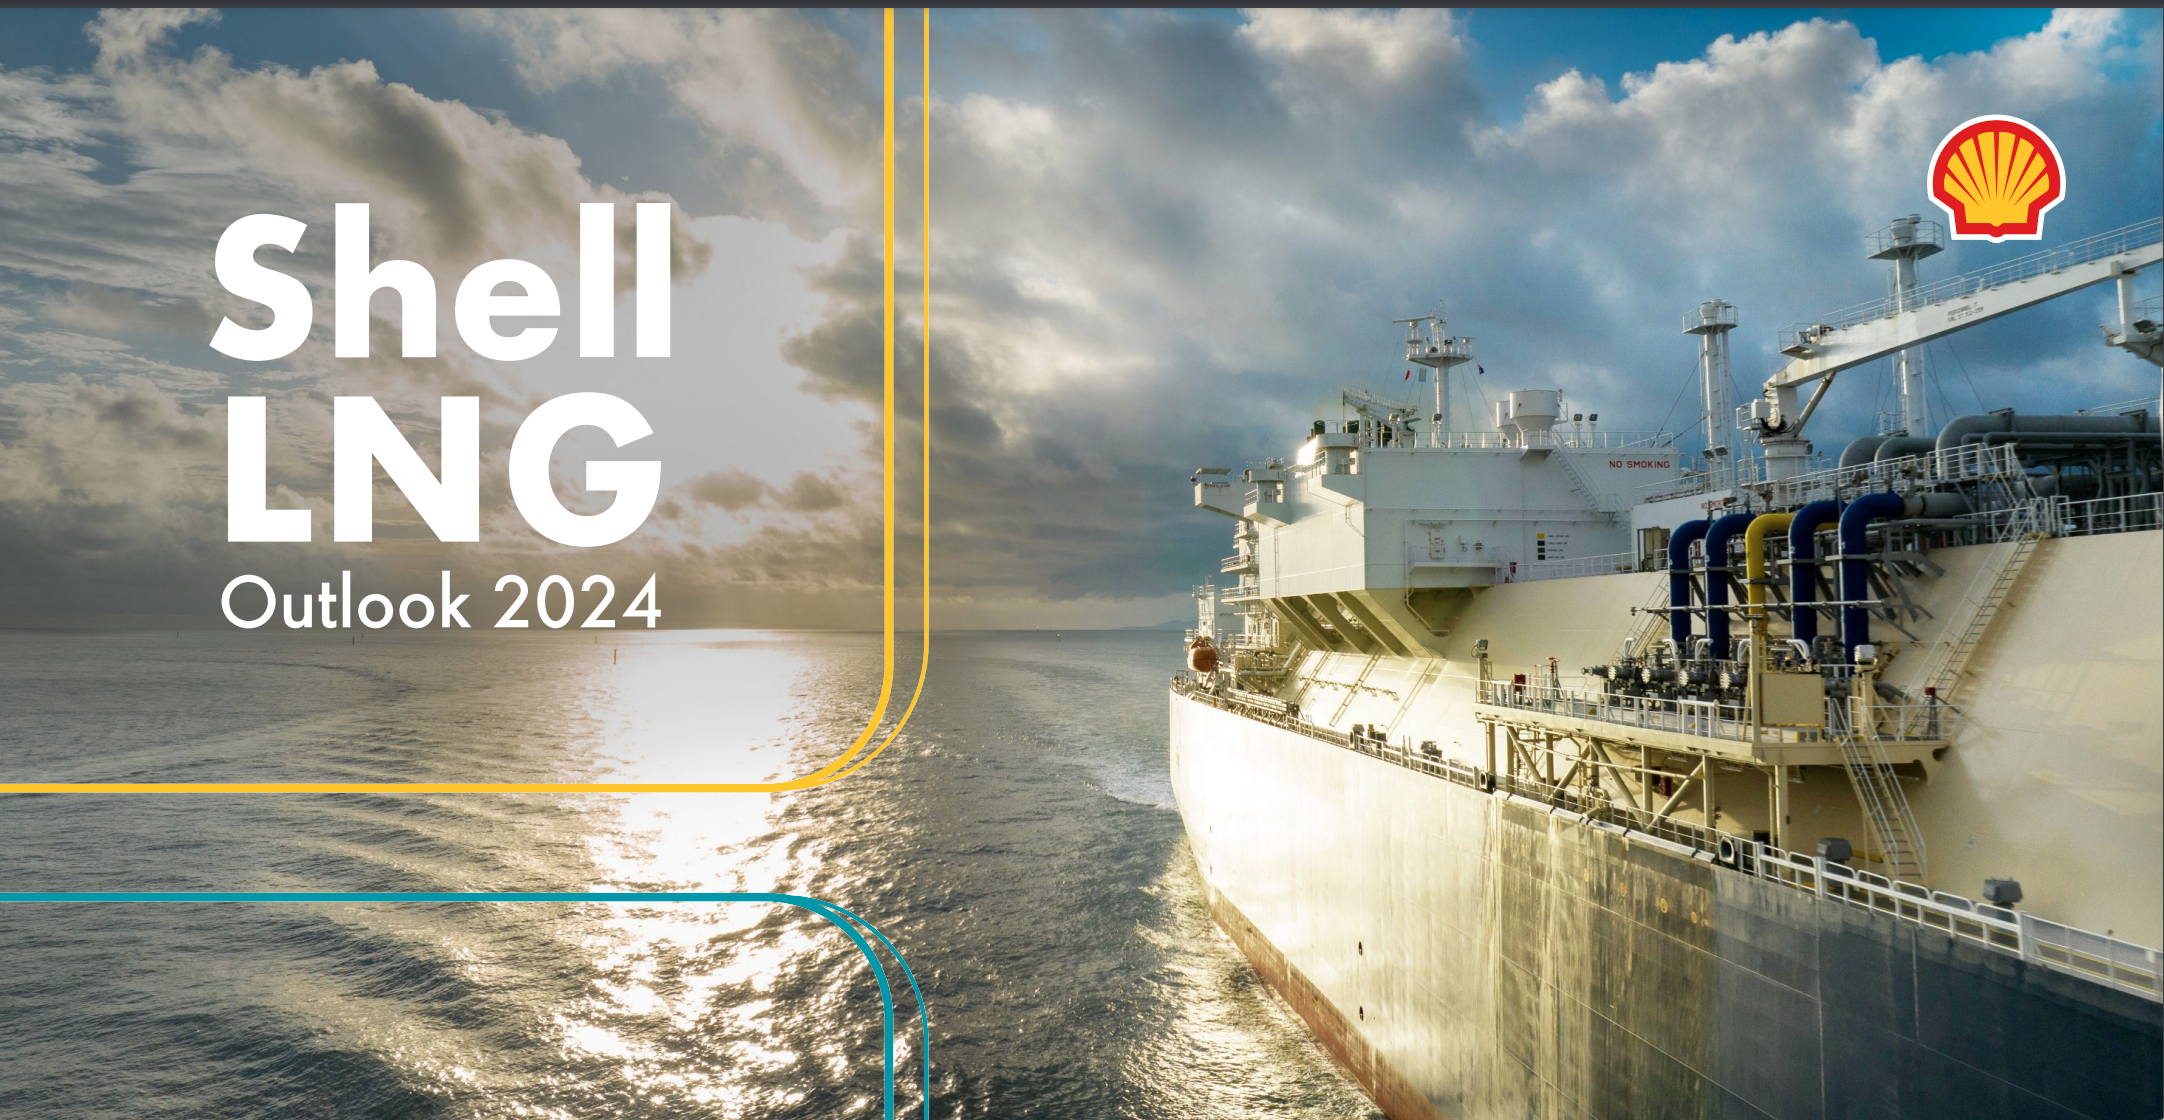 Graphic: Shell LNG Outlook 2024